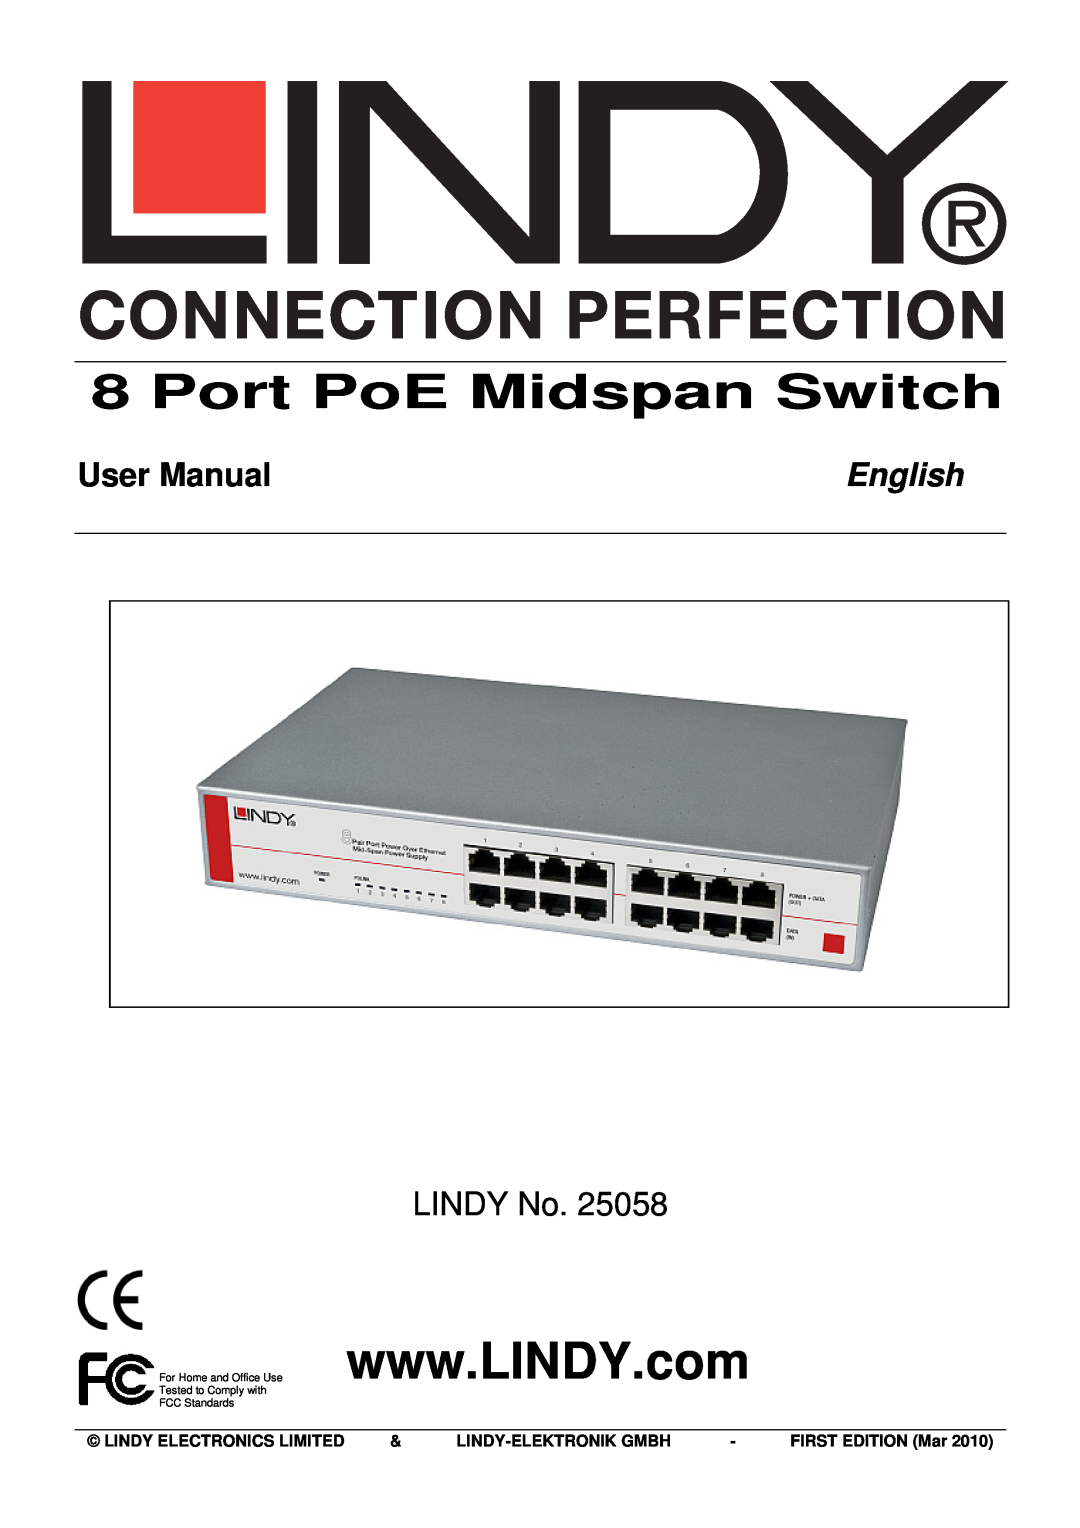 Lindy 25058 user manual English, Port PoE Midspan Switch, User Manual, LINDY No, Lindy Electronics Limited 